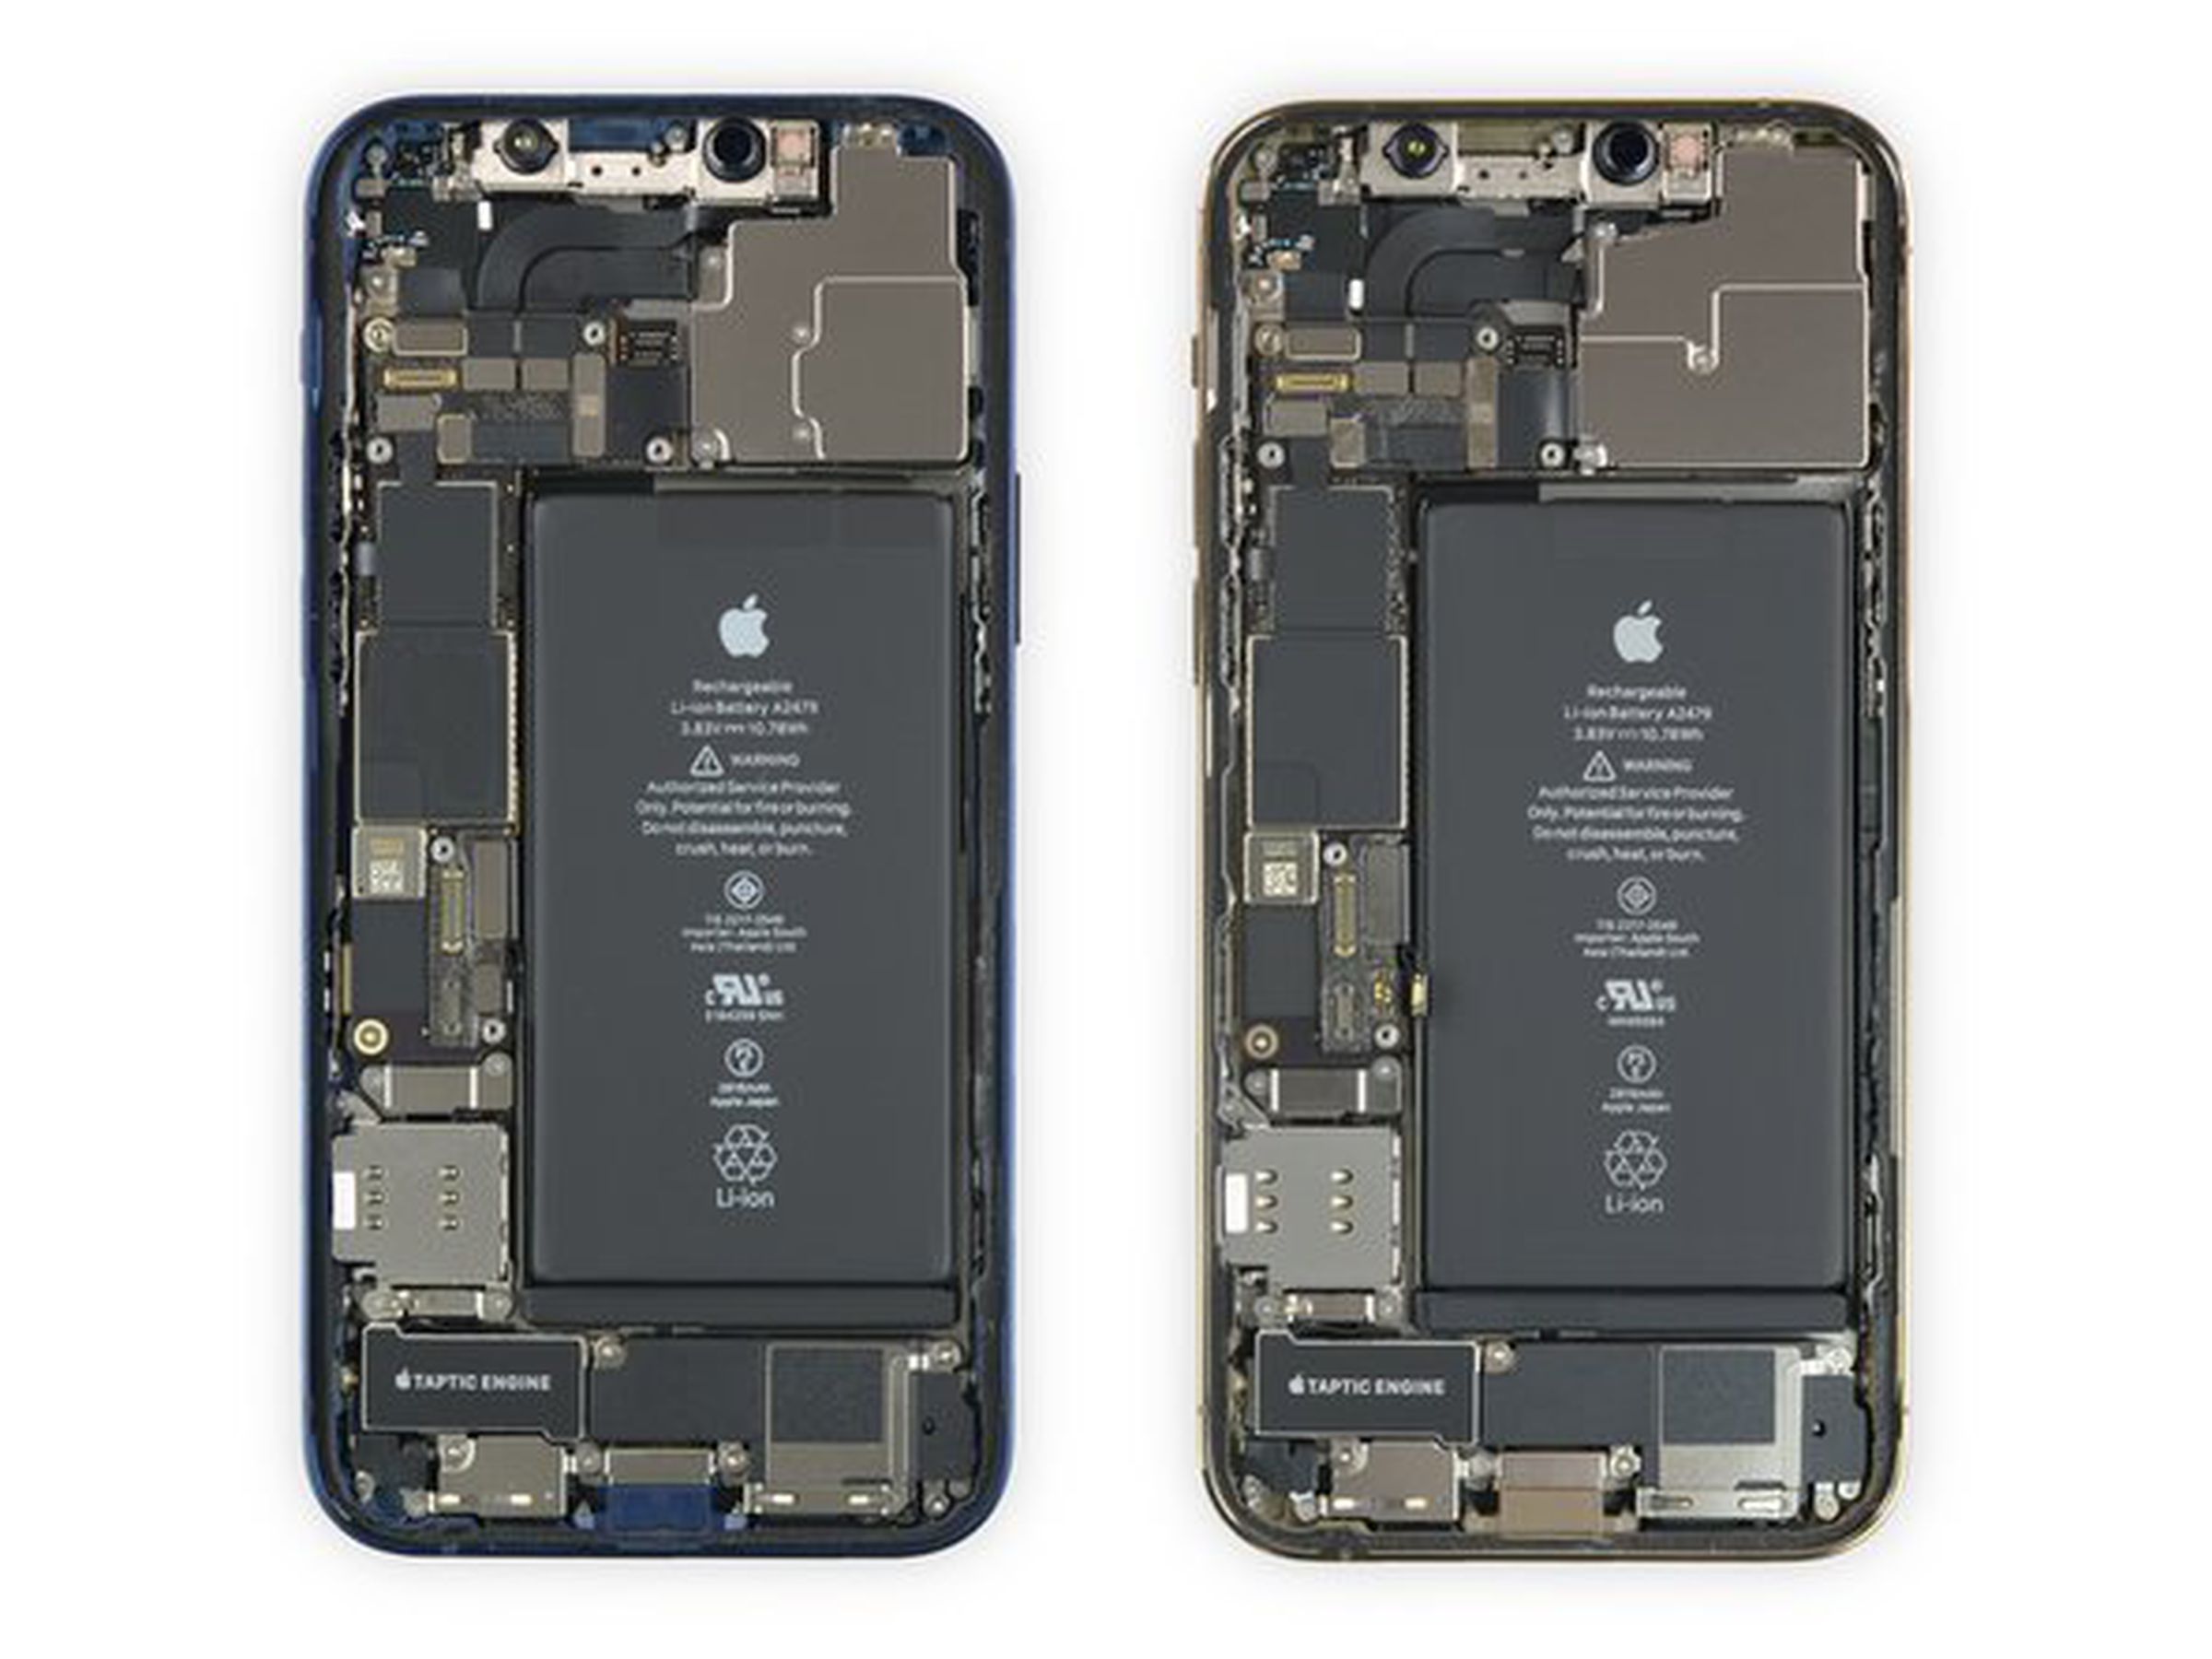 The iPhone 12 is on the left, the iPhone 12 Pro is on the right. 